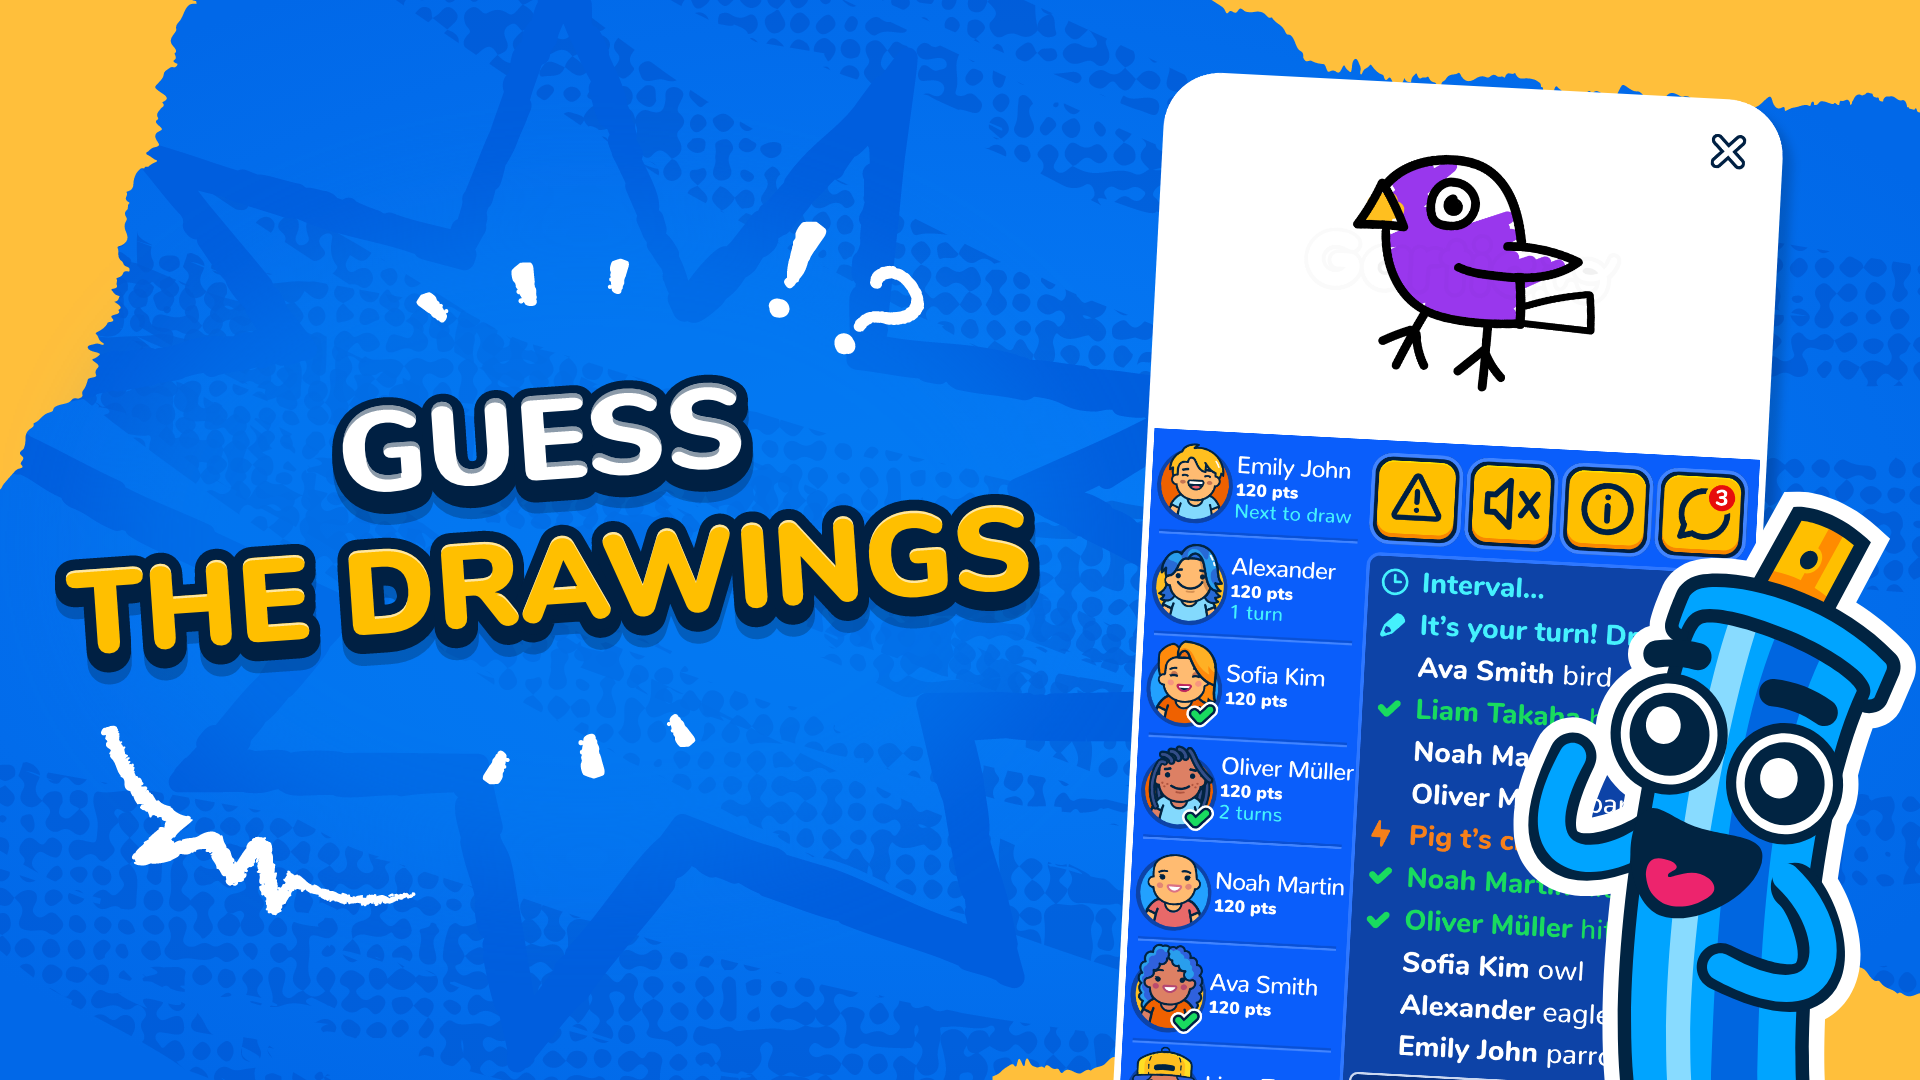 Draw This 2 - Online Charade Game